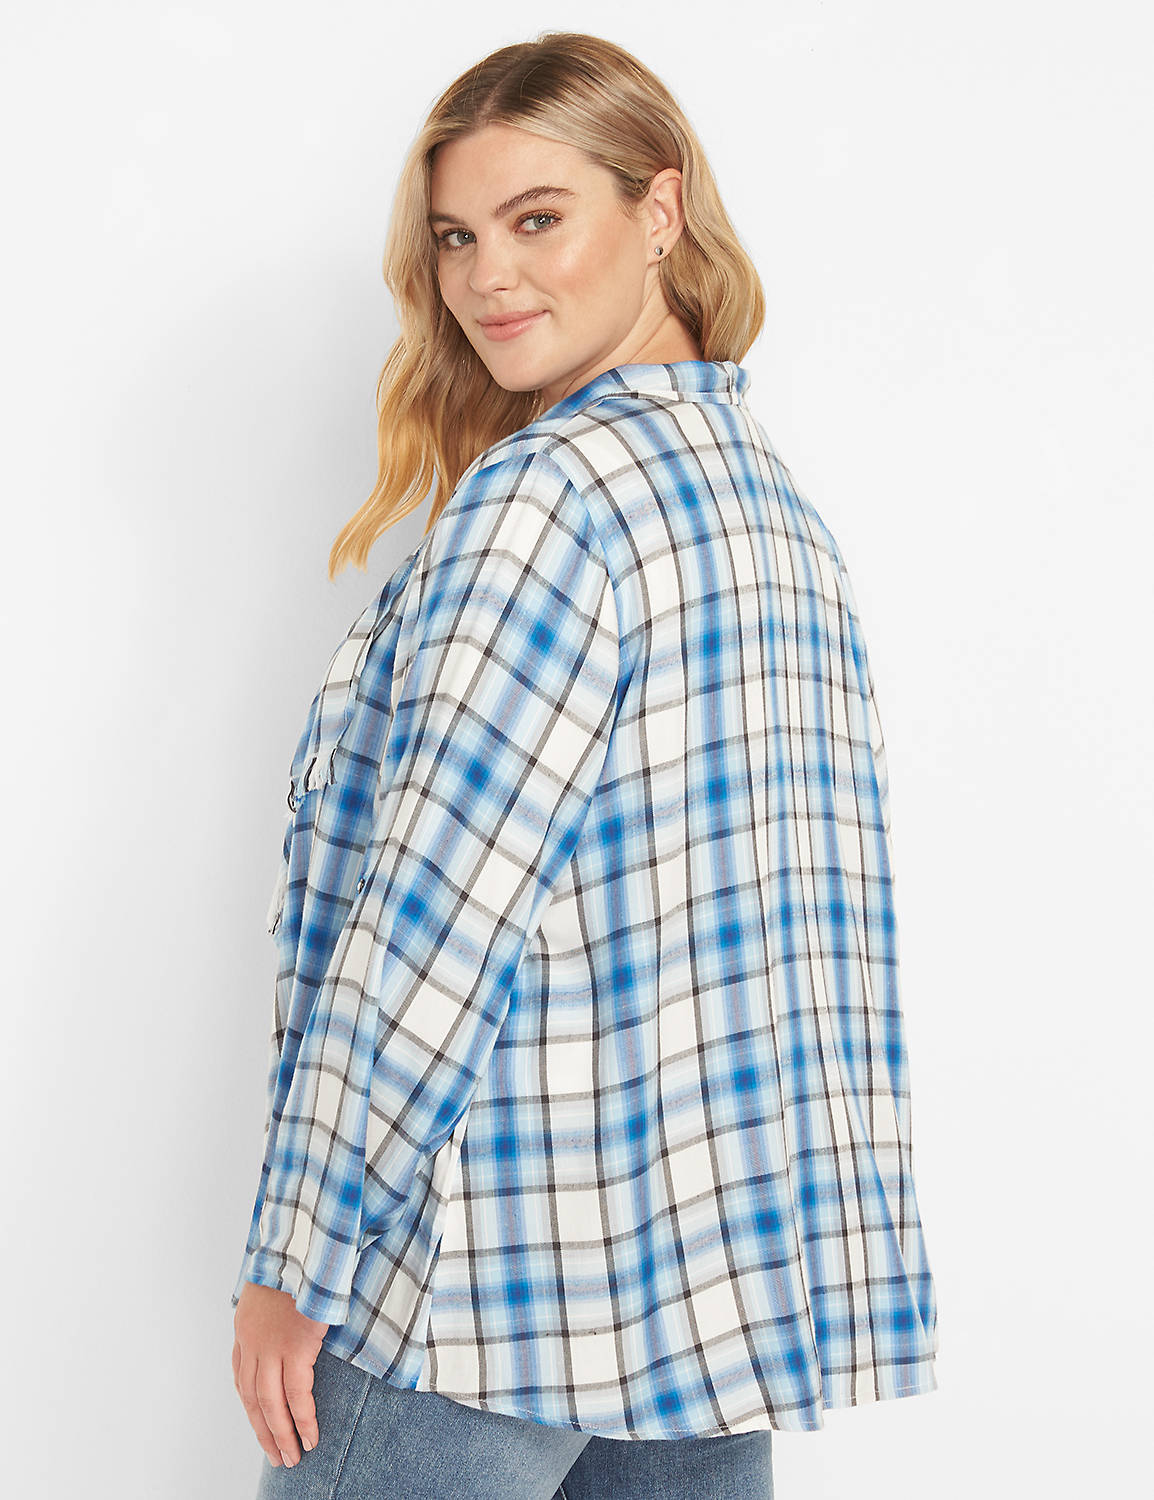 3/4 Sleeve Roll Tab Plaid Overpiece 1123783:LBH21164_MontanaPlaidTwill_CW4:38/40 Product Image 2